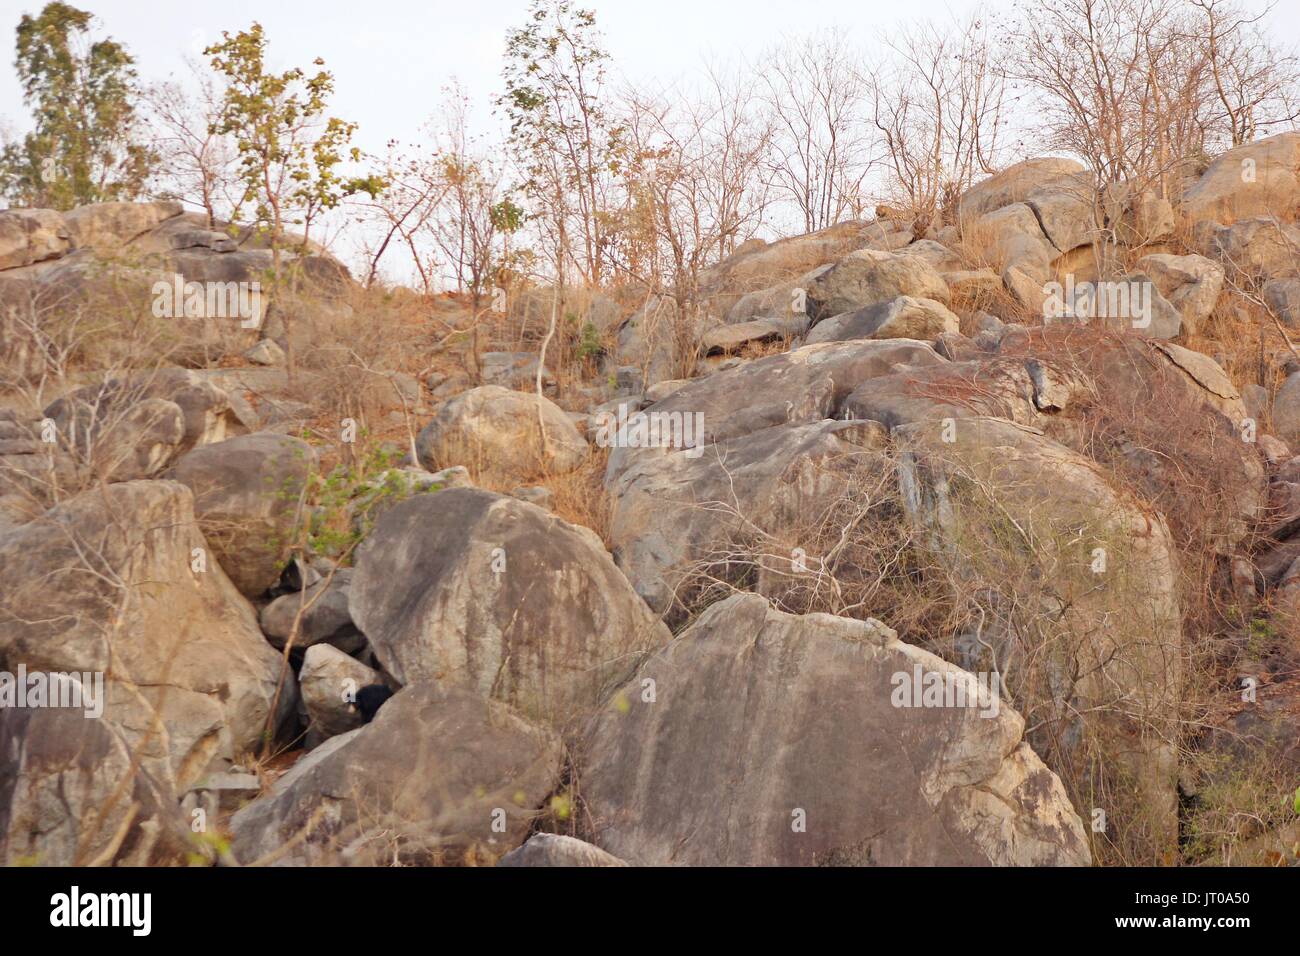 Elusive Mammal Sloth Bear with her 2 cubs and Leopard in single image (Sharing Habitat) Stock Photo